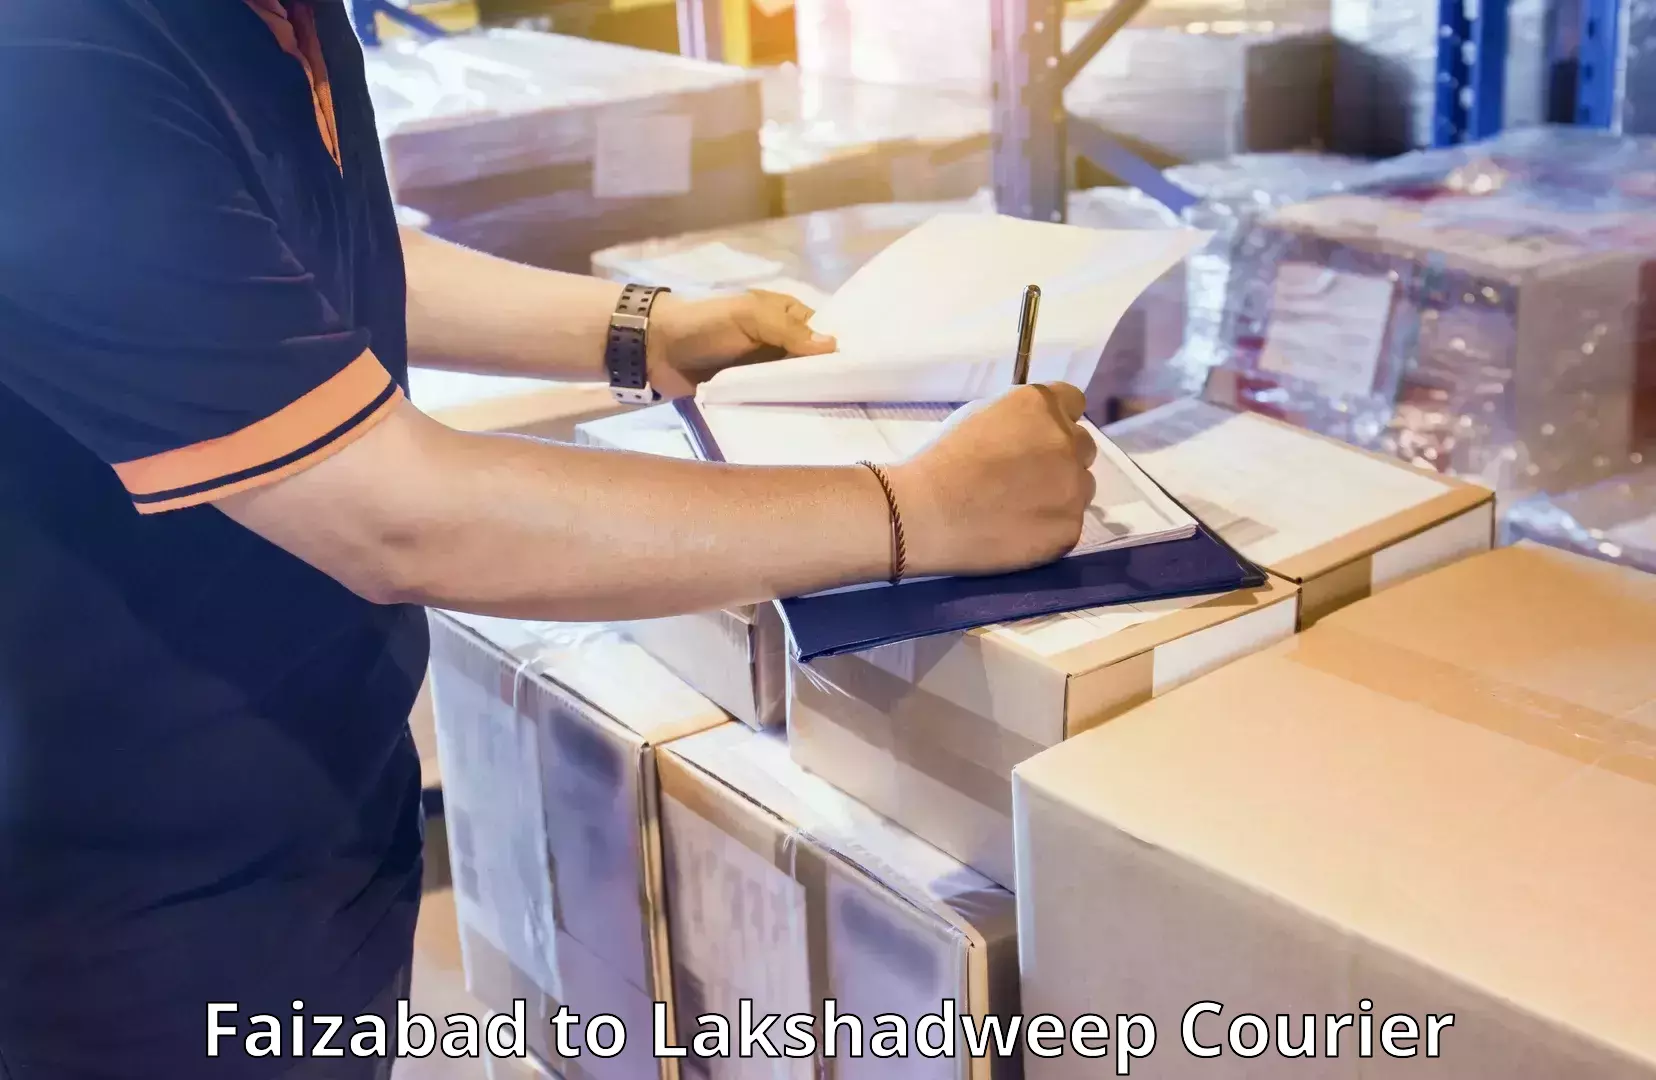 Instant baggage transport quote Faizabad to Lakshadweep